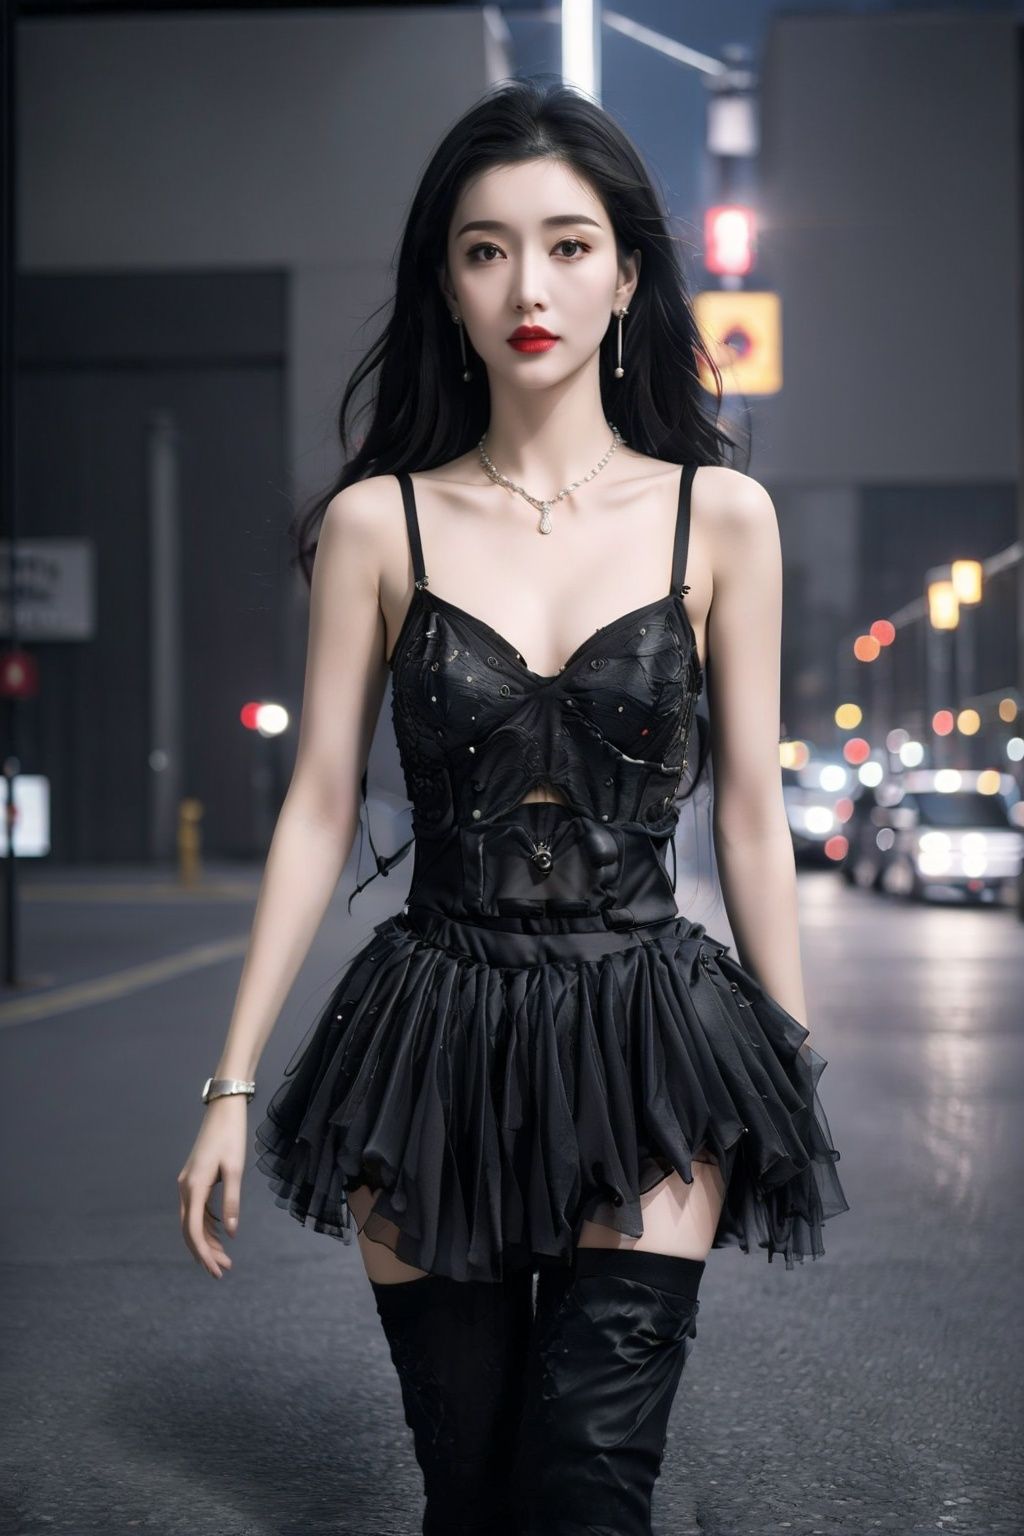   1  girl,  young  woman,  black  dress,  (short:1.2),  sexy,  alluring,  seductive,  beautiful  eyes,  light  makeup,  black  hair,  long  hair,  (curly  hair:1.1),  earrings,  necklace,  bracelet,  high  heels,  thigh-highs,  legs,  walking,  outdoor,  city,  night,  streetlights,  neon  signs,  buildings,  (cityscape:1.2),  urban,  modern,  fashionable,  confident,  (sophisticated:1.1),  mysterious,  allure,  attractive,  (glamorous:1.0),  posh,  stylish,  elegant,  (classy:1.1),  portrait,  close-up,  shallow  depth  of  field,  (cinematic  composition:1.3),  urban  life,  city  girl,  nightlife,  vibrant,  energetic,  dynamic,  (hdr:1.0),  accent  lighting,  (pantyshot:1.0),  fish  eye  lens.heigirl